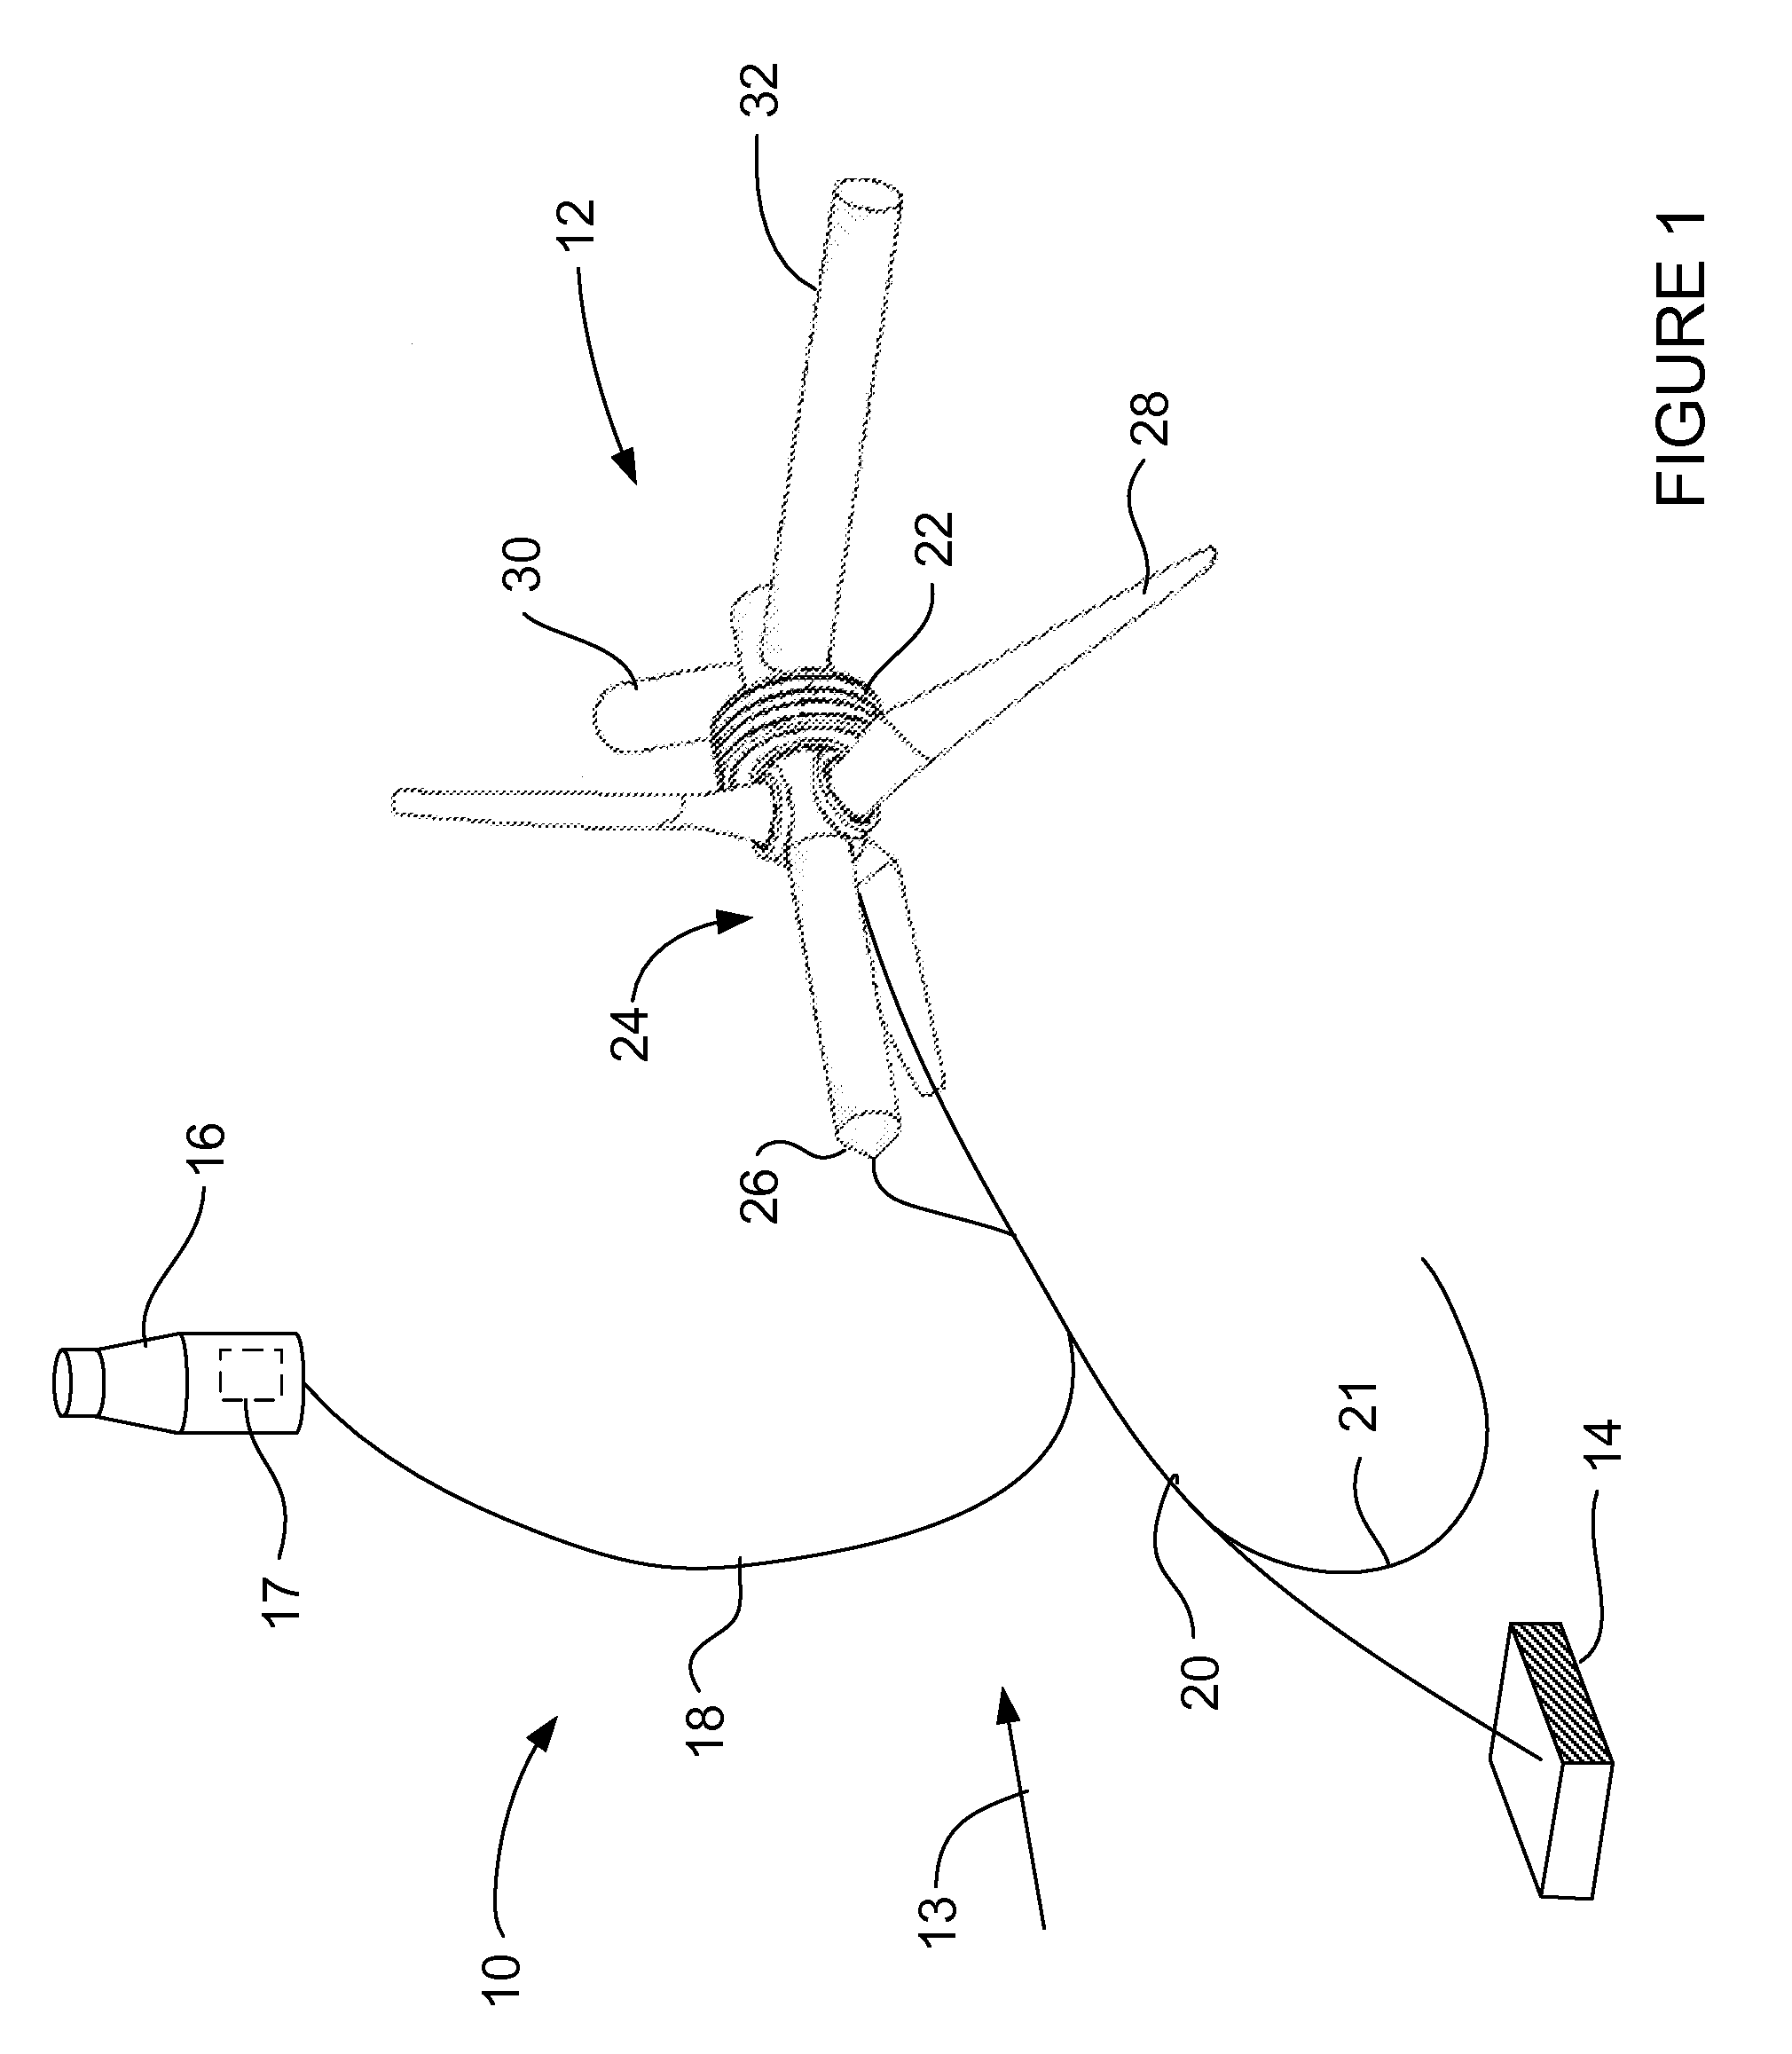 Water turbine system and method of operation